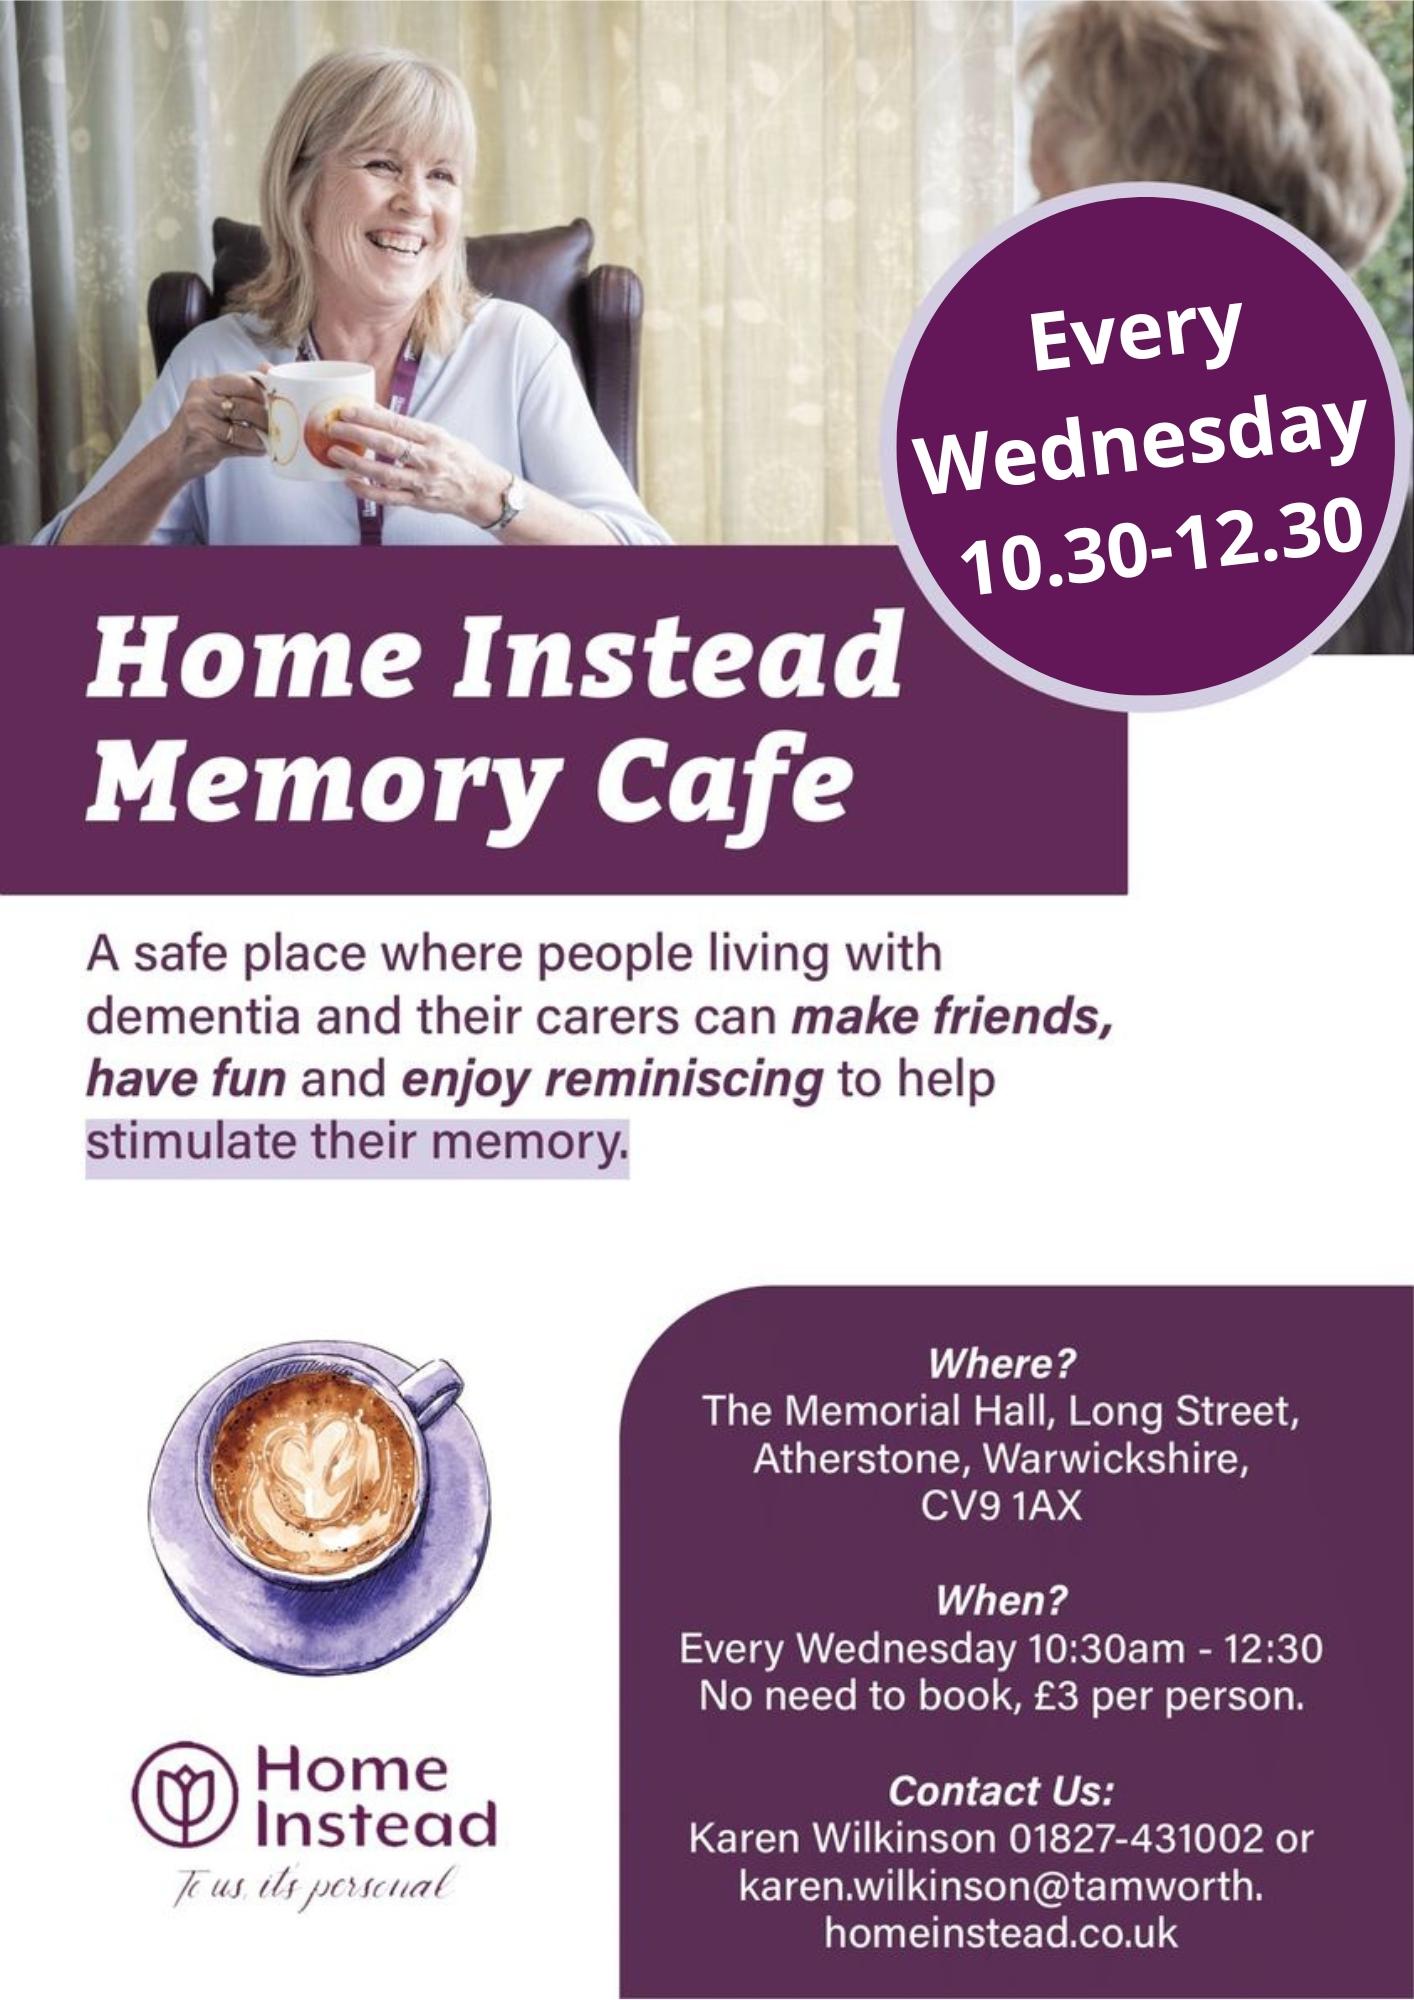 Atherstone leisure complex dementia and memory cafe